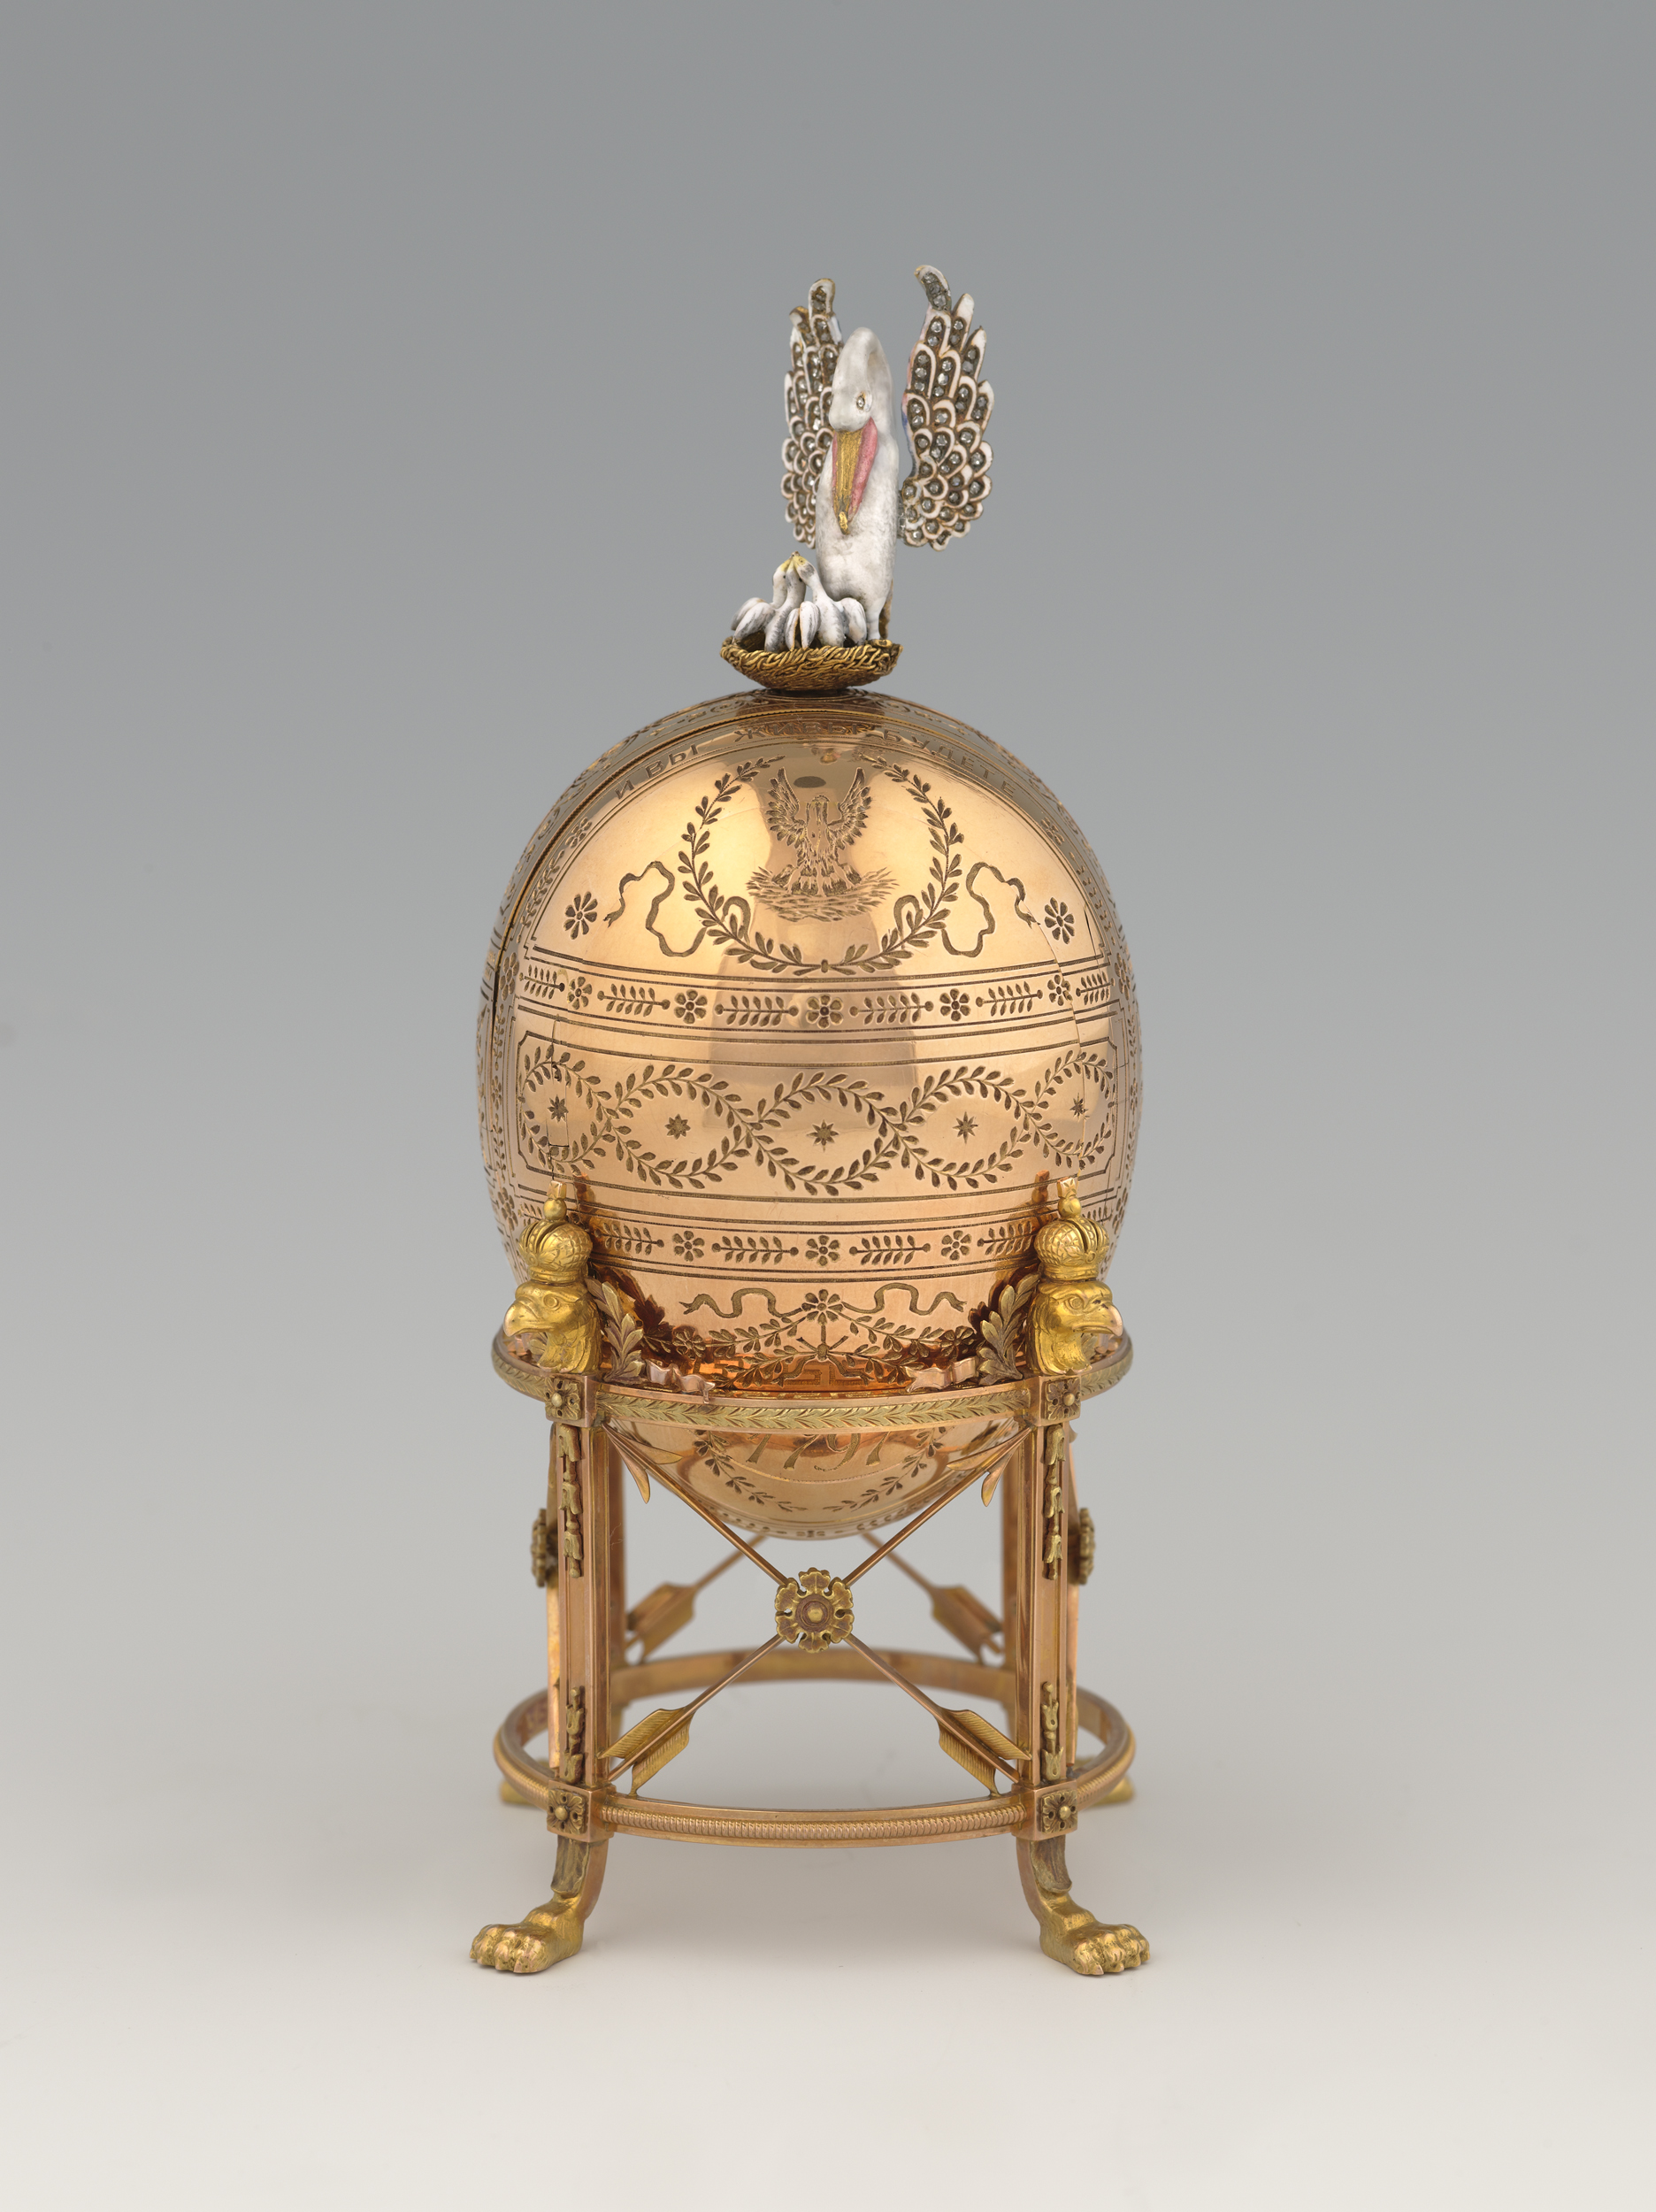 The bird perched atop the Imperial Pelican Easter Egg — which was created to celebrate the Dowager Empress of Russia — is meant to symbolize maternal care. Photo: Katherine Wetzel © Virginia Museum of Fine Arts.